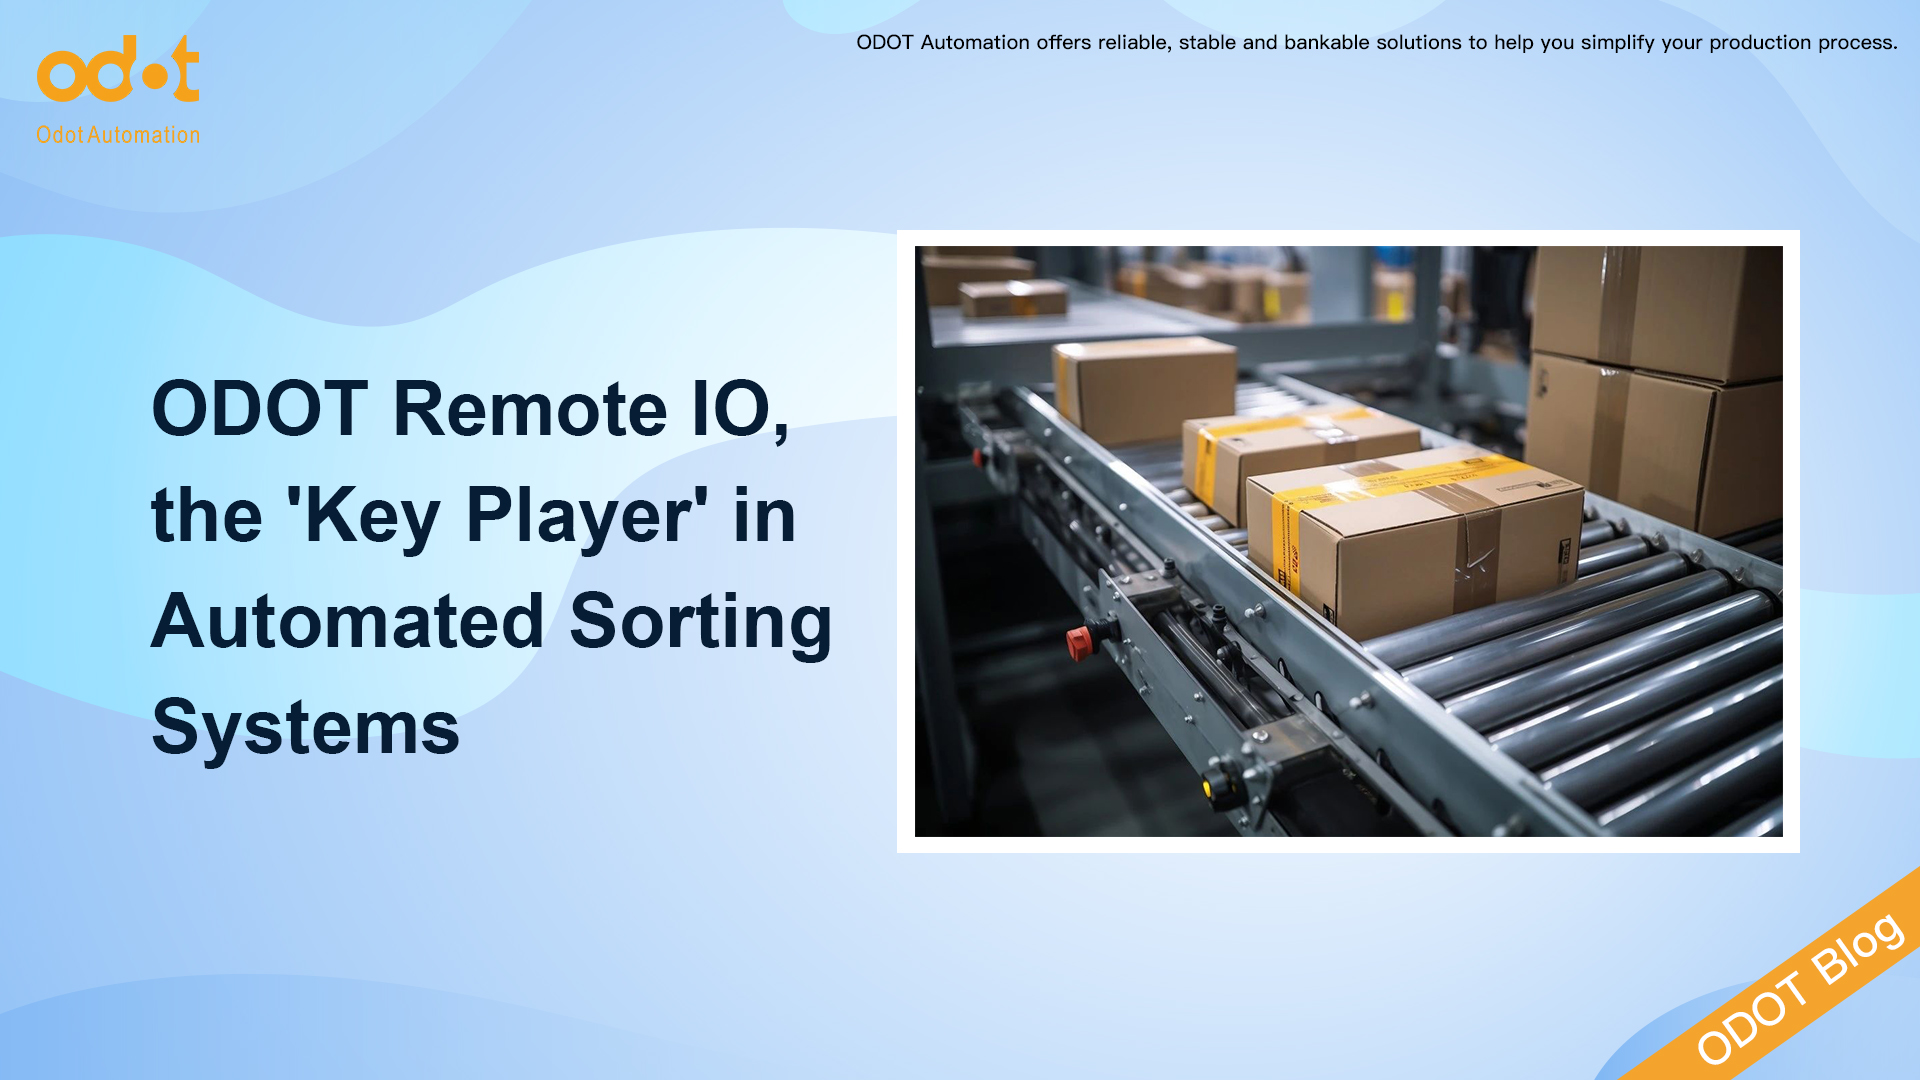 ODOT Longinquus IO, in 'Key Player' in Automated Systems Sorting